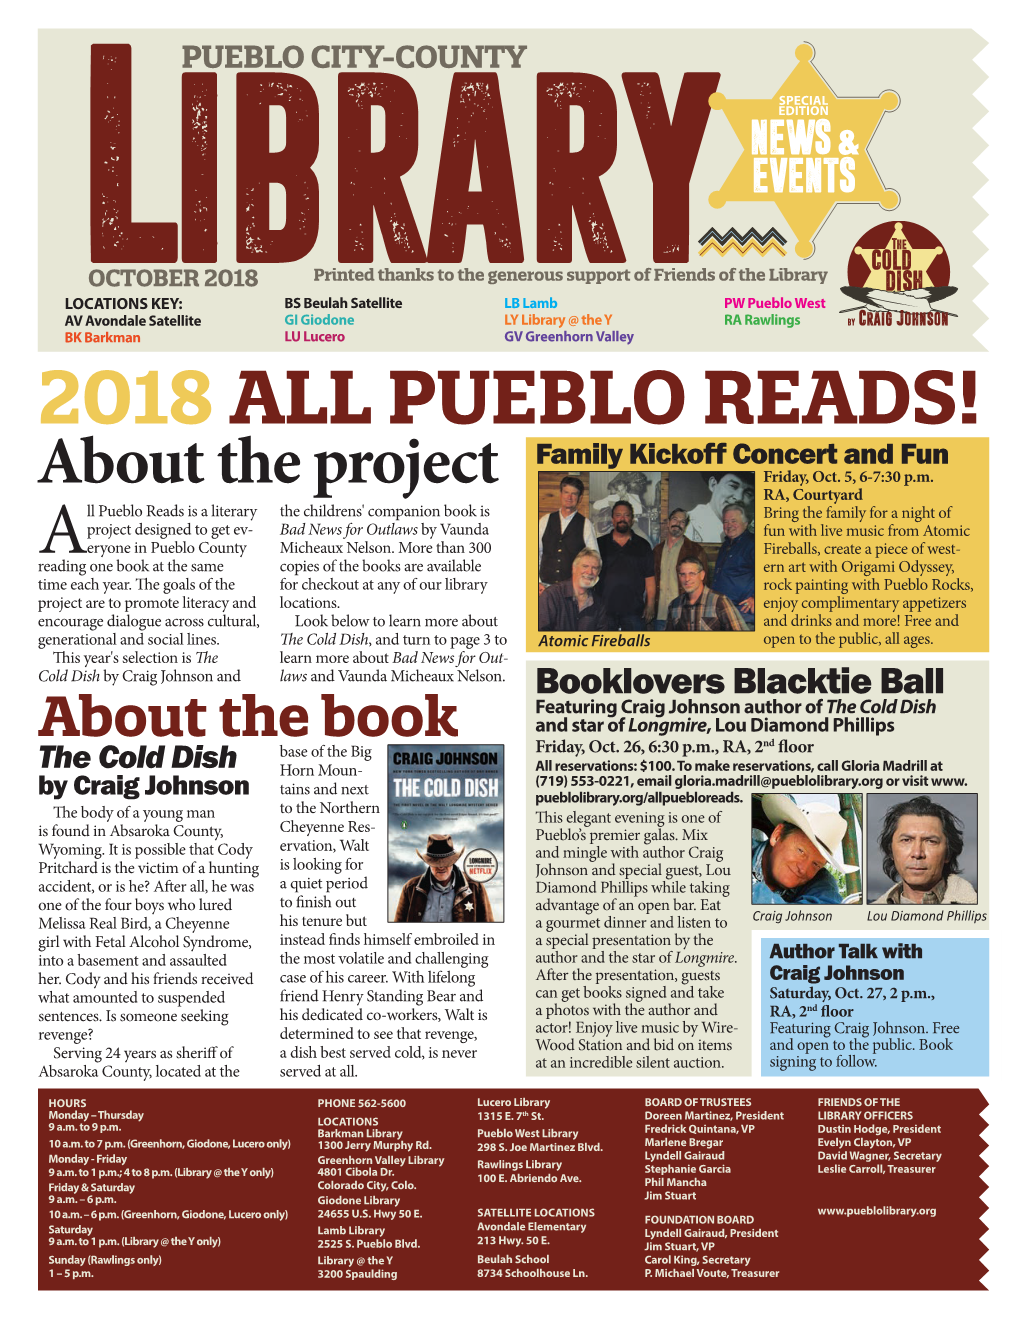 2018 ALL PUEBLO READS! Family Kickoff Concert and Fun Friday, Oct